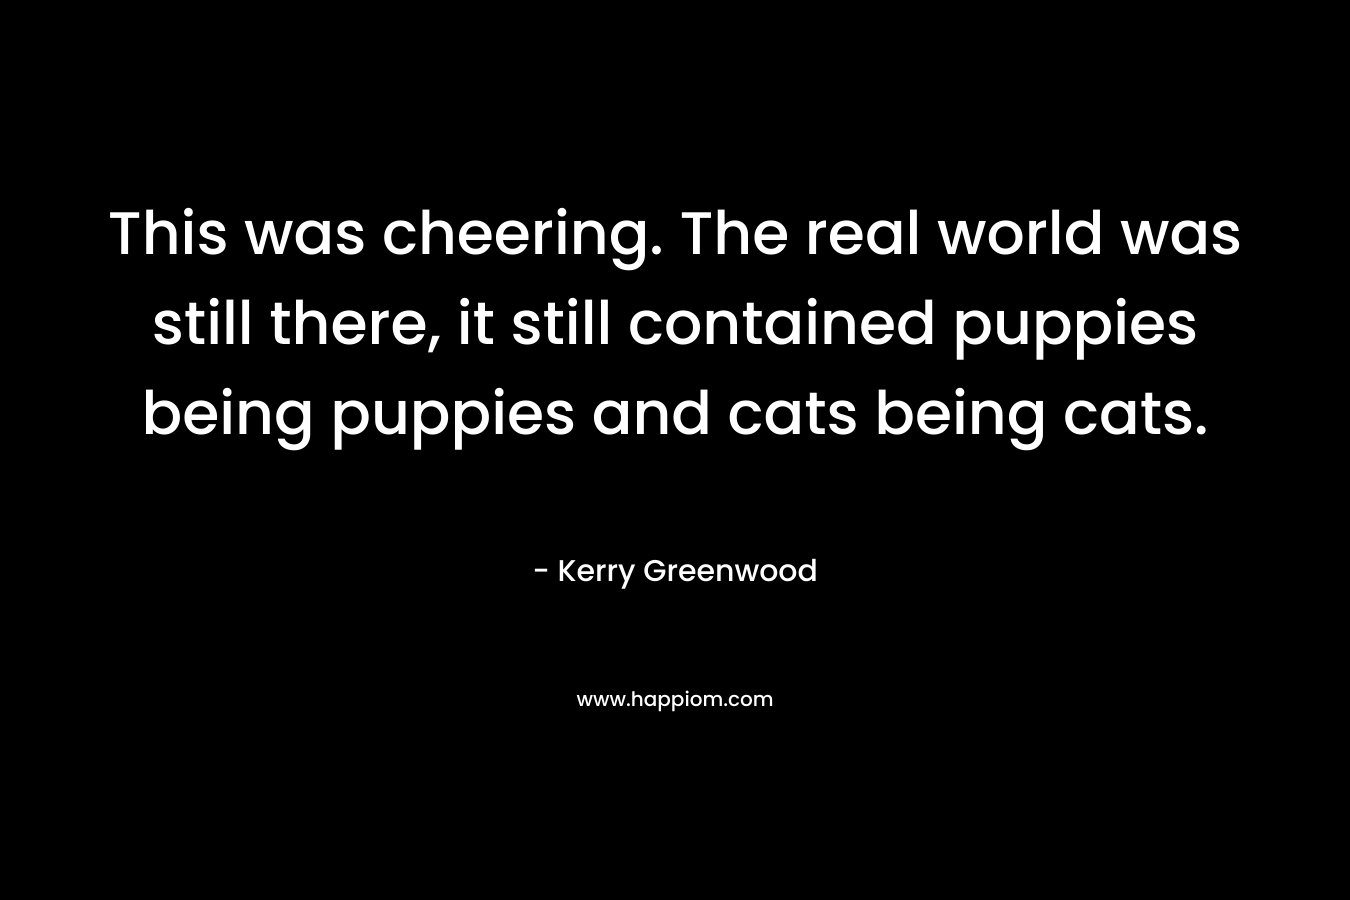 This was cheering. The real world was still there, it still contained puppies being puppies and cats being cats.